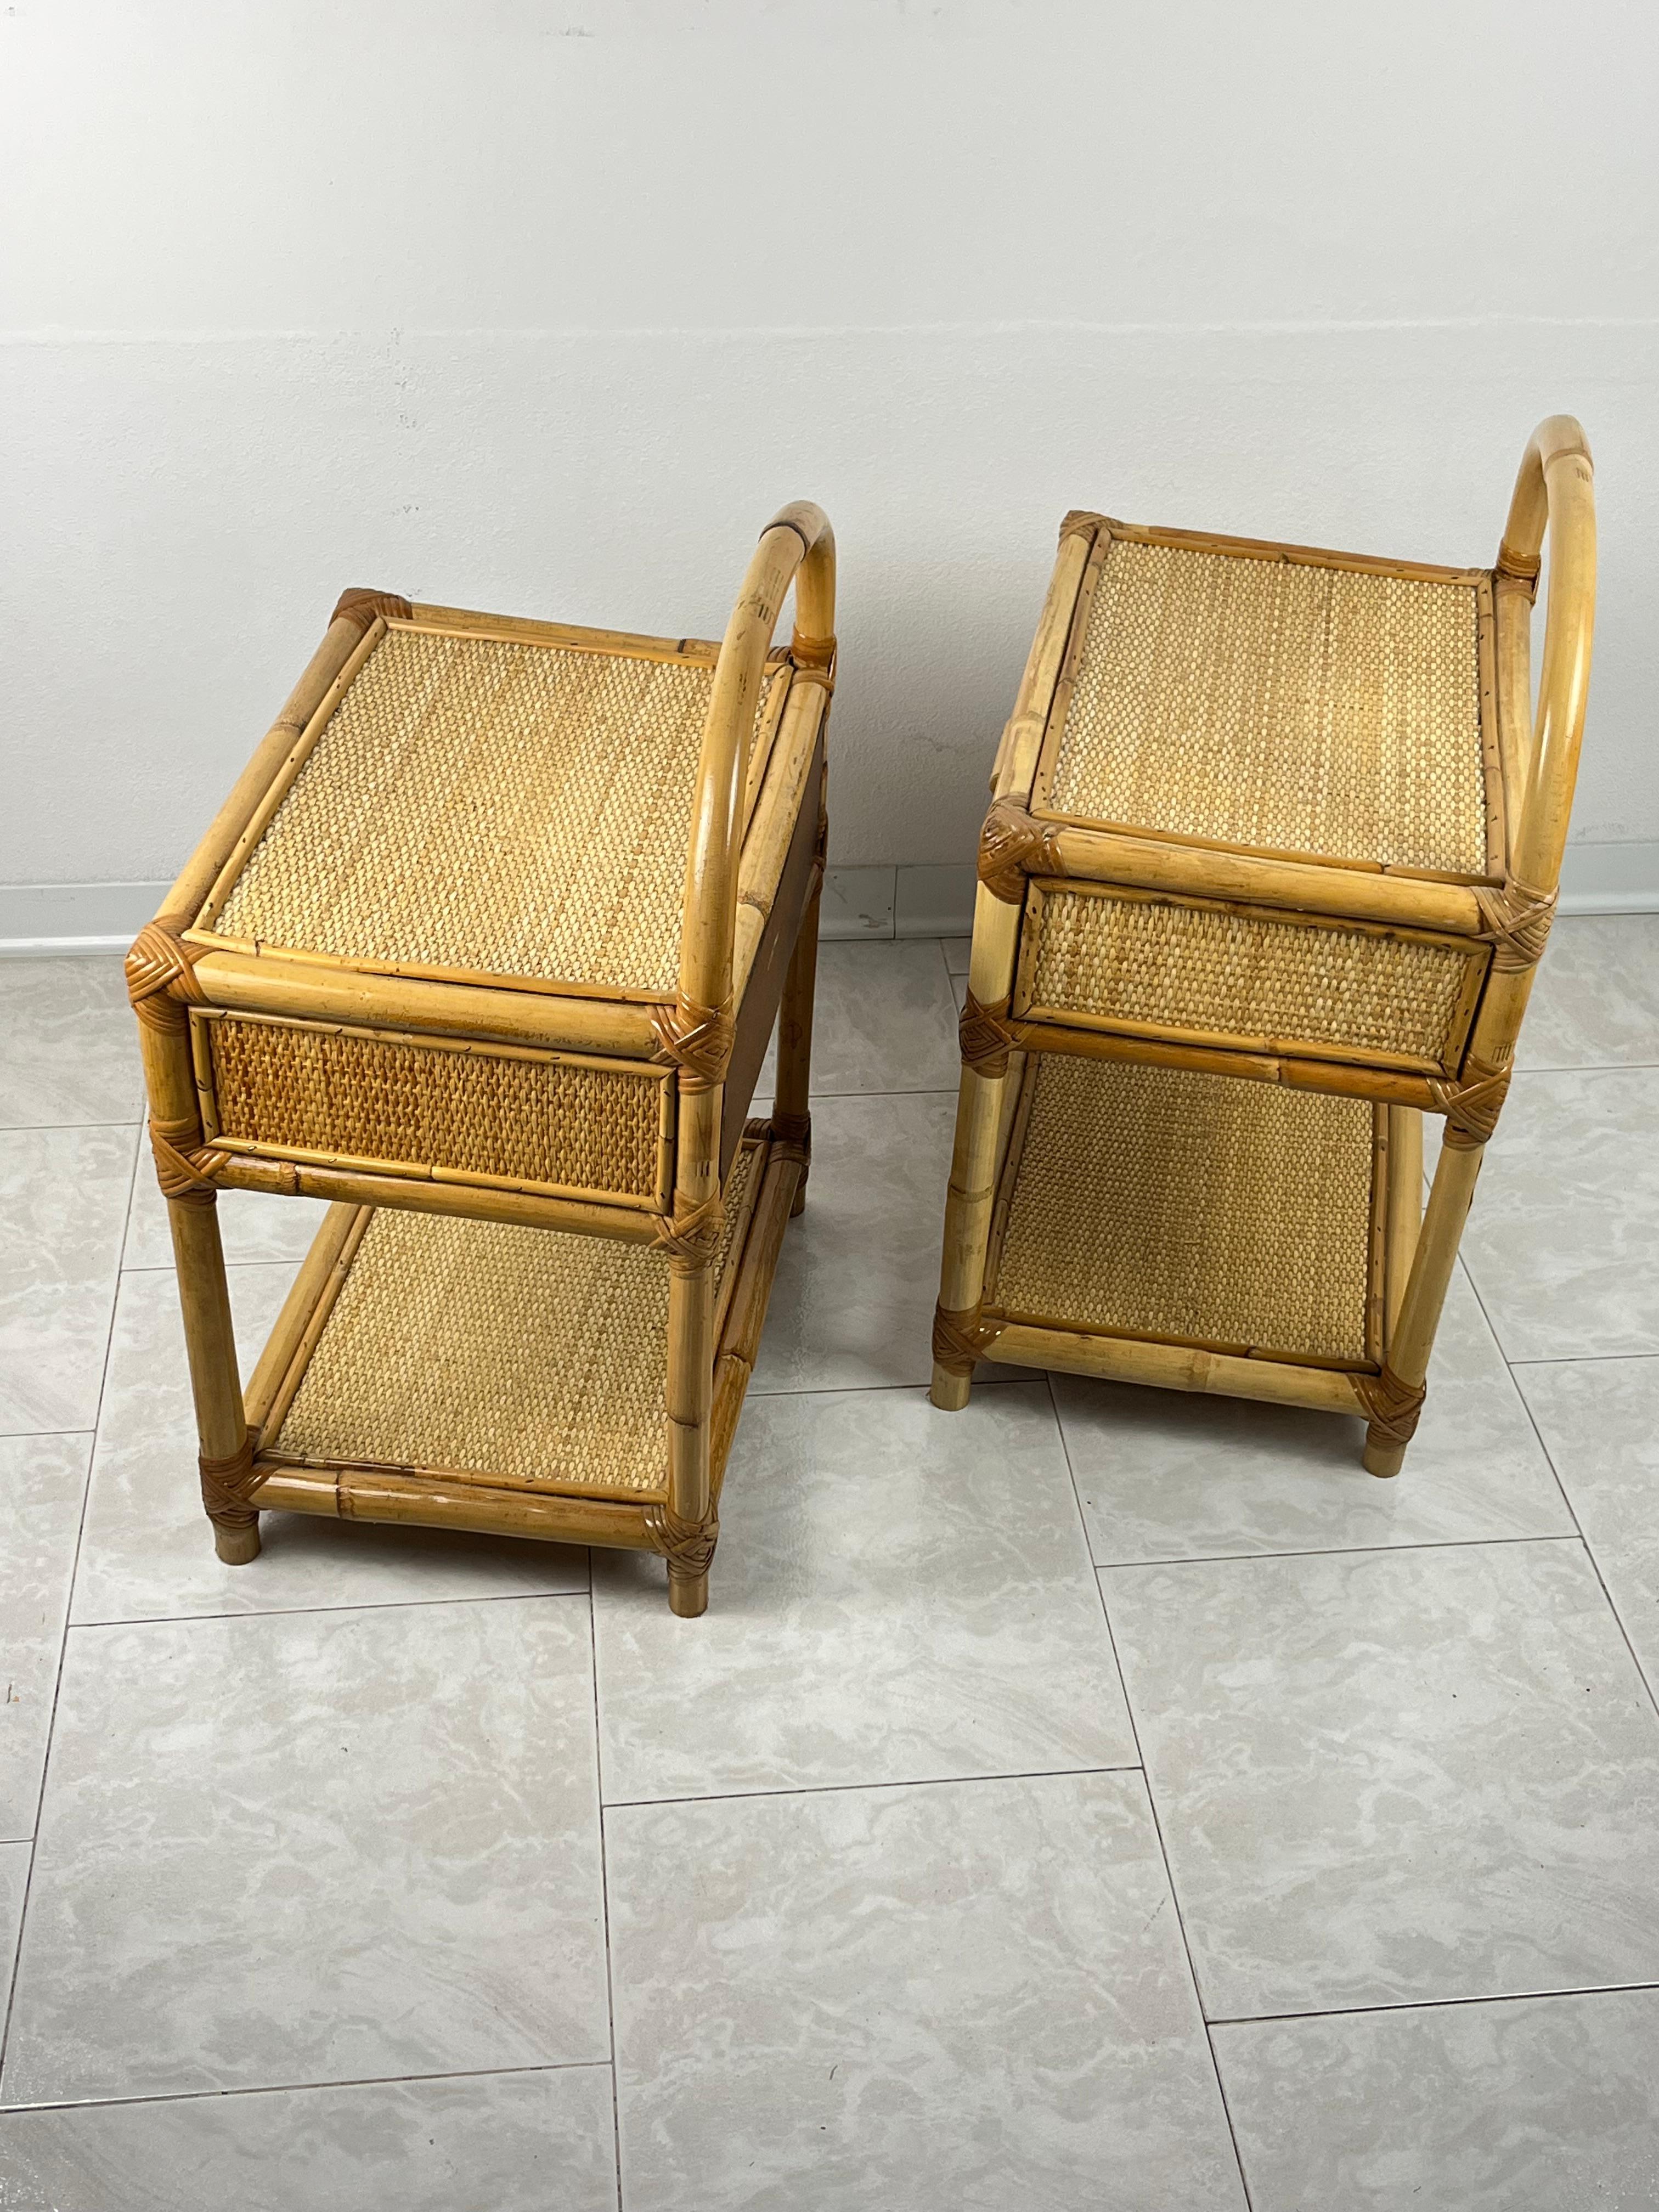 Late 20th Century Pair of Vintage Italian  Bamboo and Rattan Bedside Tables 1970s For Sale